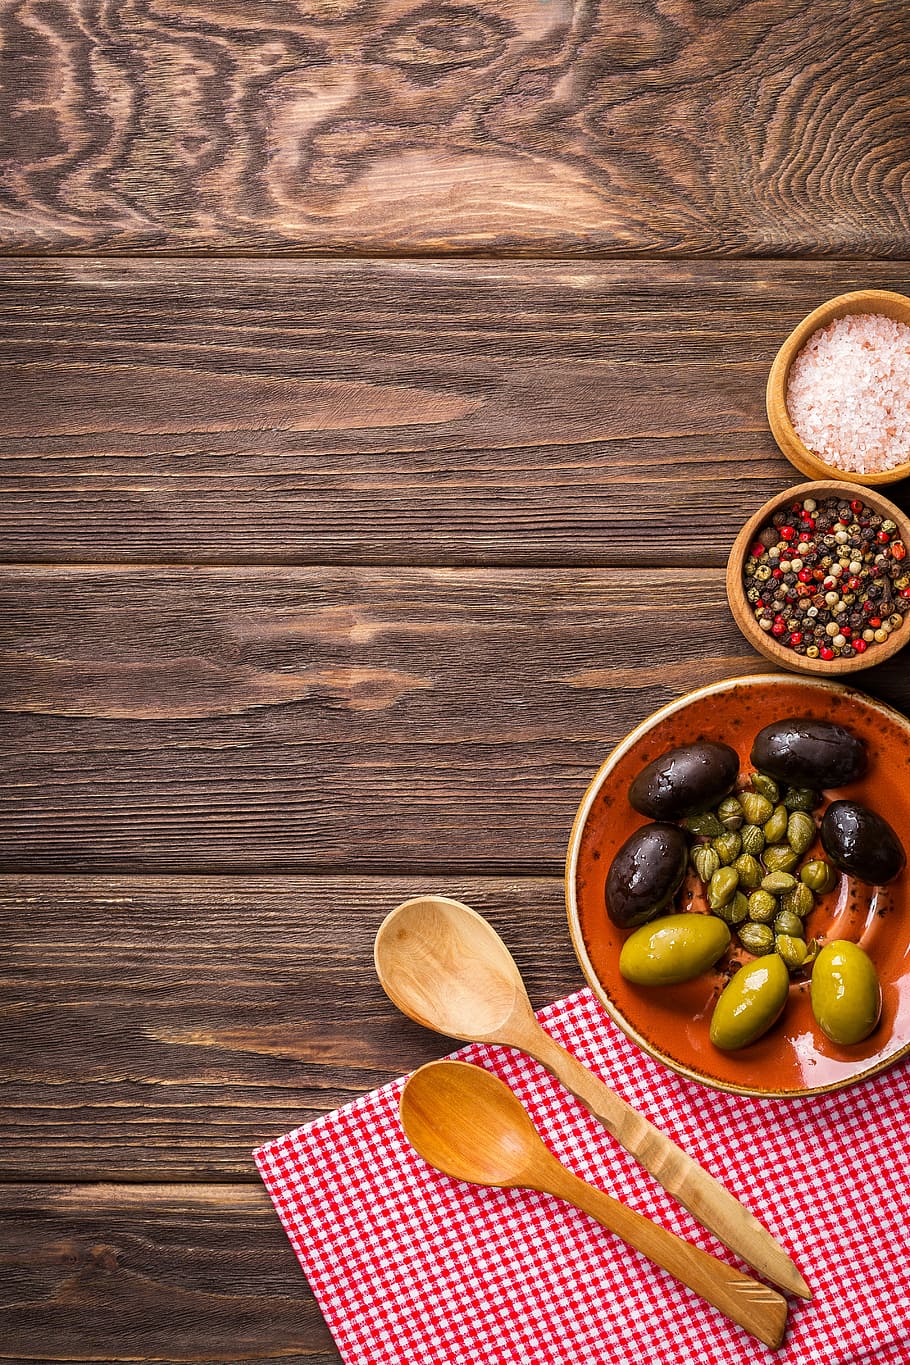 beans and fruits, background, food, tasty, olives, wooden background, cooking, plate, kitchen, gourmet